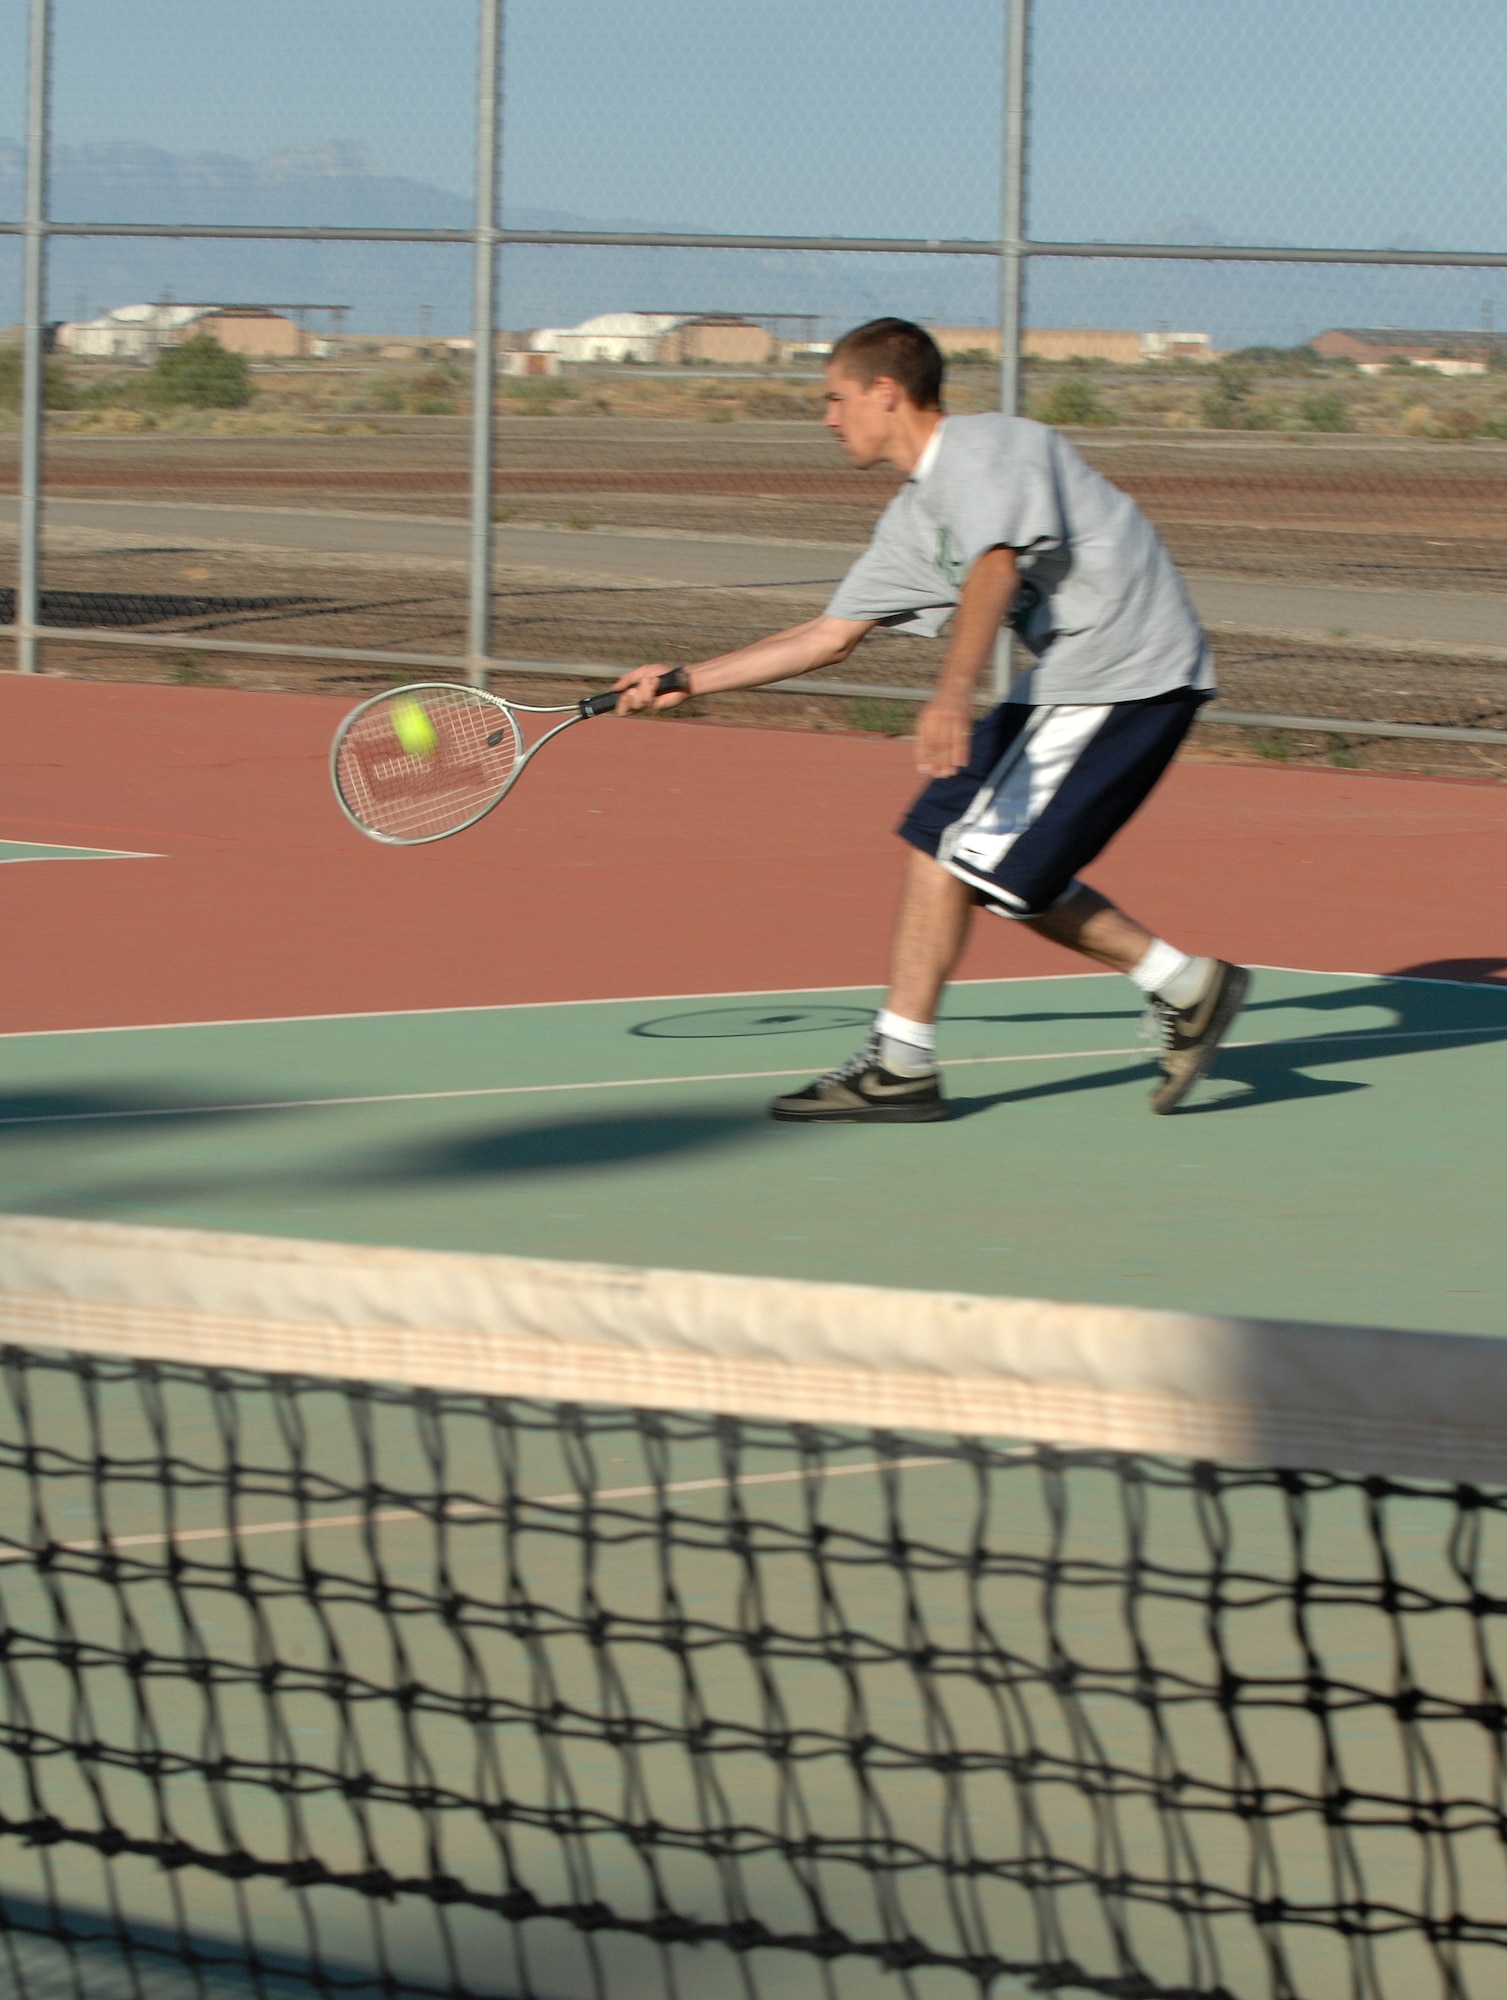 Airman 1st Class Miles Mendez, 49th Materiel Maintenance Group, reaches to hit the tennis ball during his match against Capt. Chris Rosales, 49th Logistics Readiness Squadron, on Sports Day at Holloman Air Force Base, N.M., October 10. More than 20 tennis players participated in the competition. (U.S. Air Force photo/Airman Sondra M. Escutia)